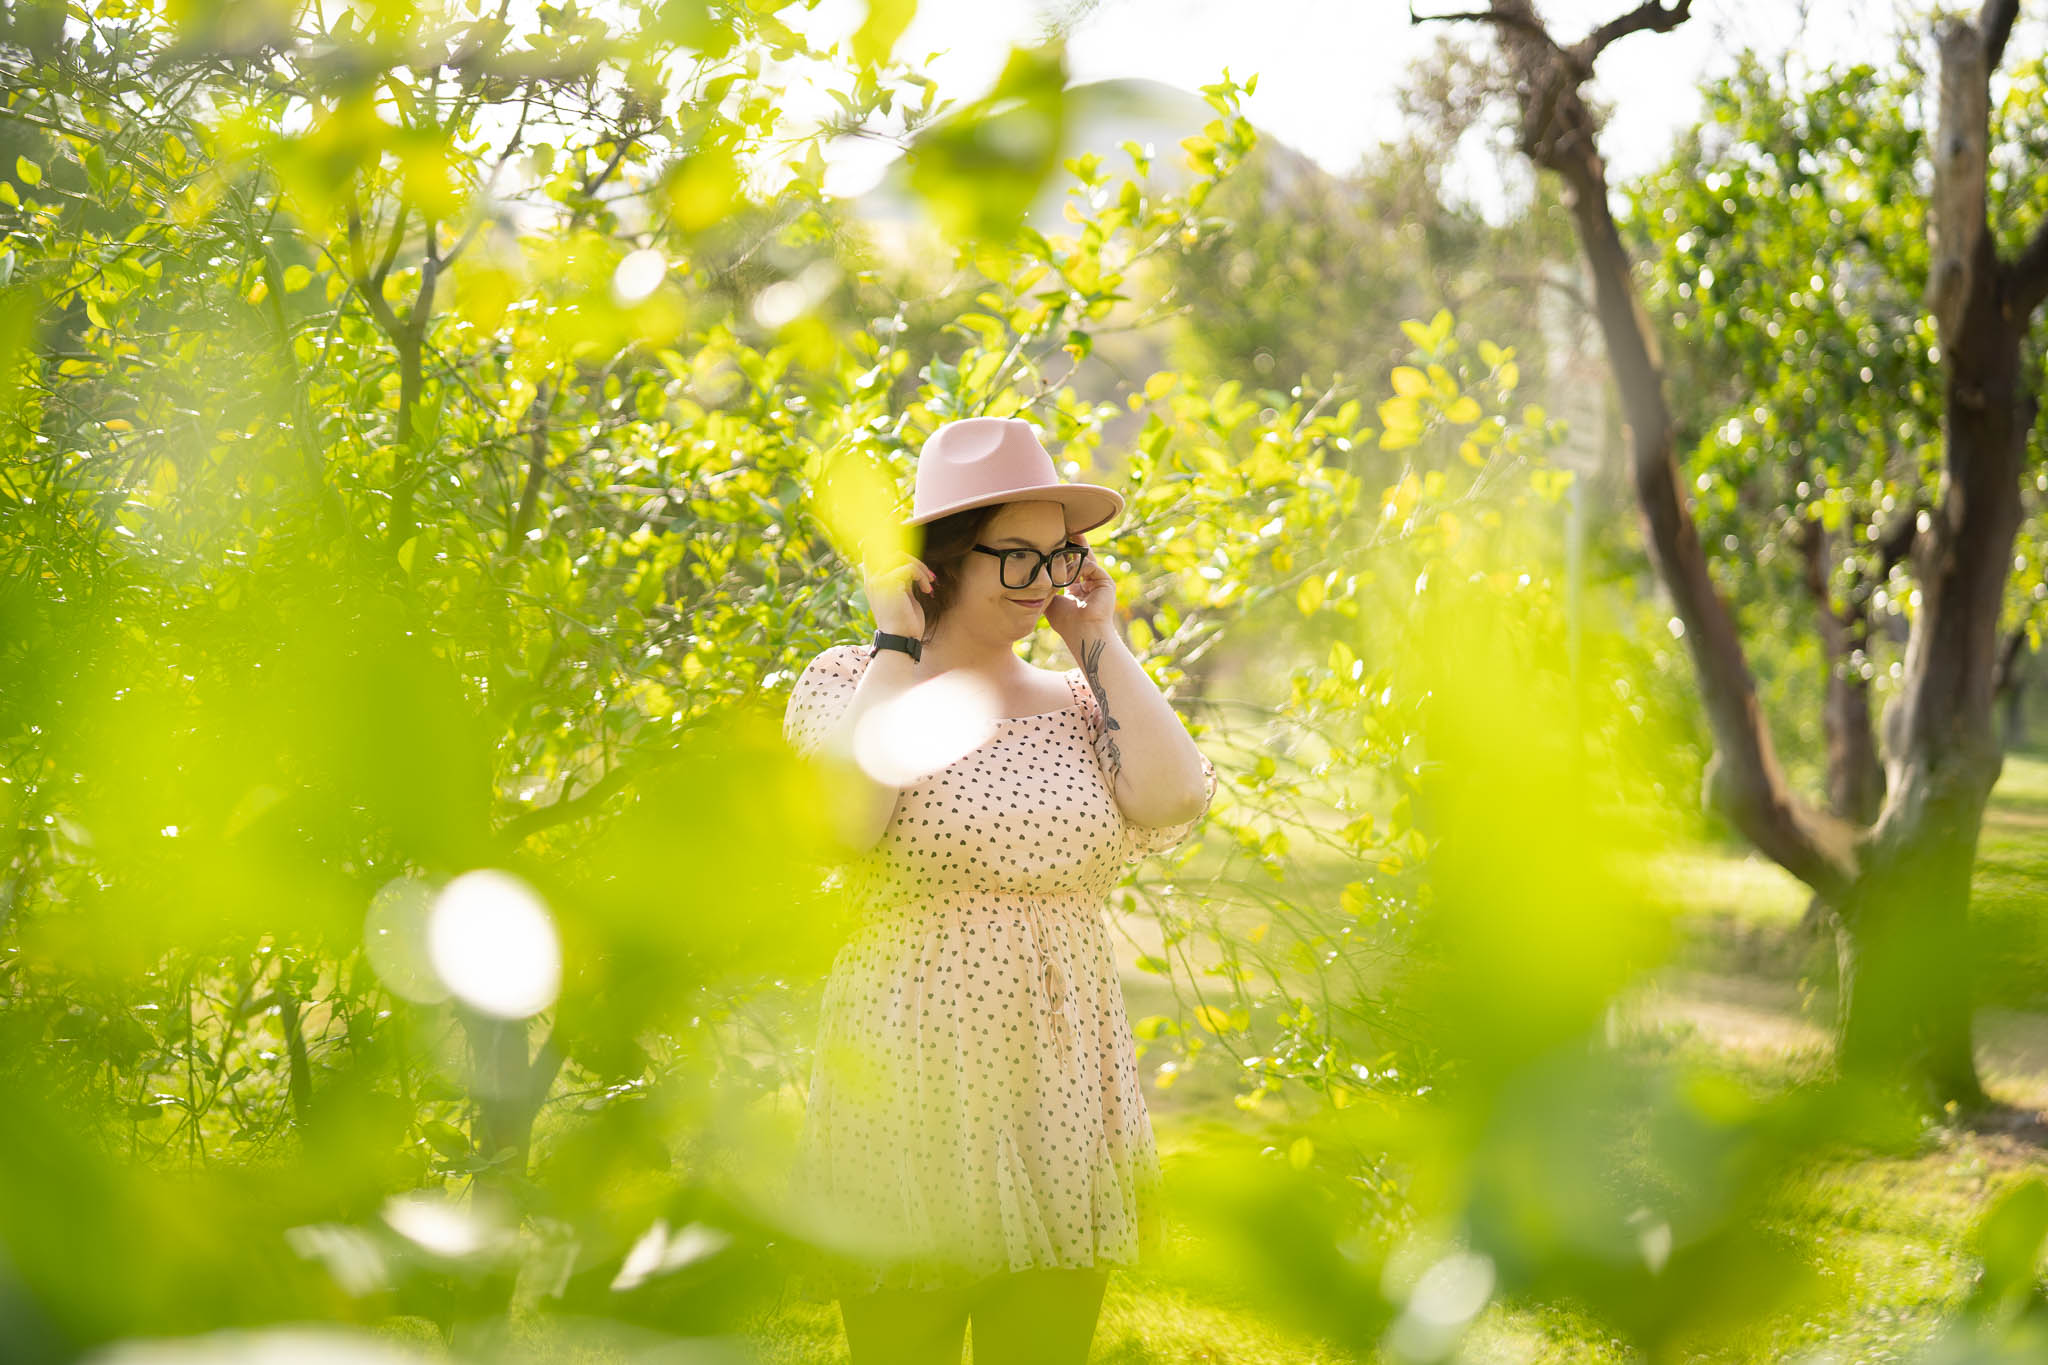 ThomasKim_photography A woman in a hat is talking on the phone during her K & S Engagement Session in an orchard.